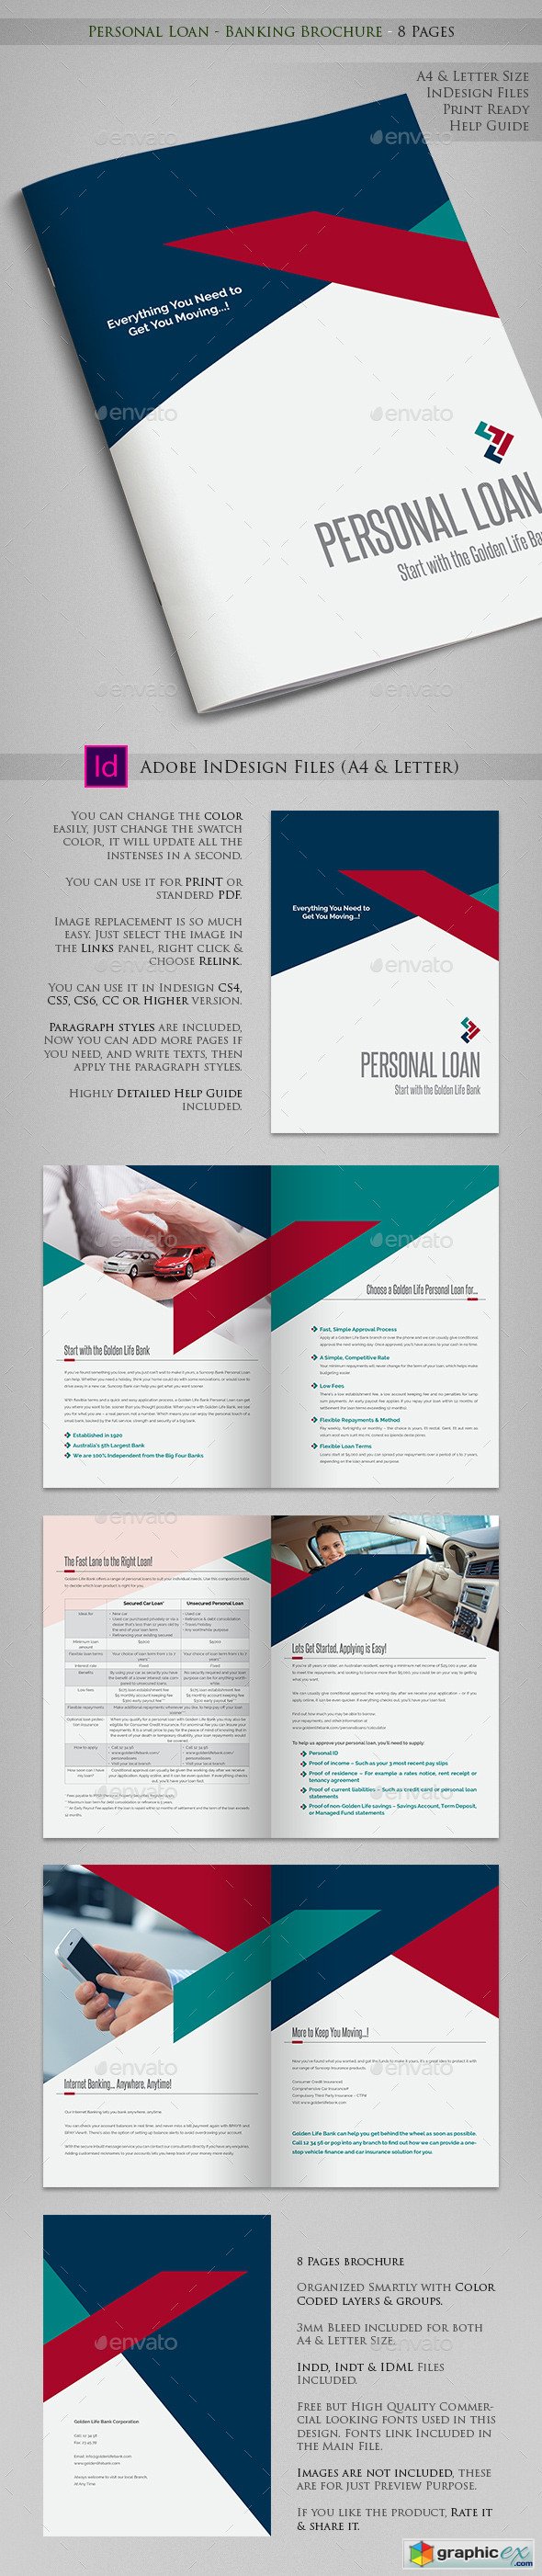 Personal Loan - Banking Brochure - 8 Pages